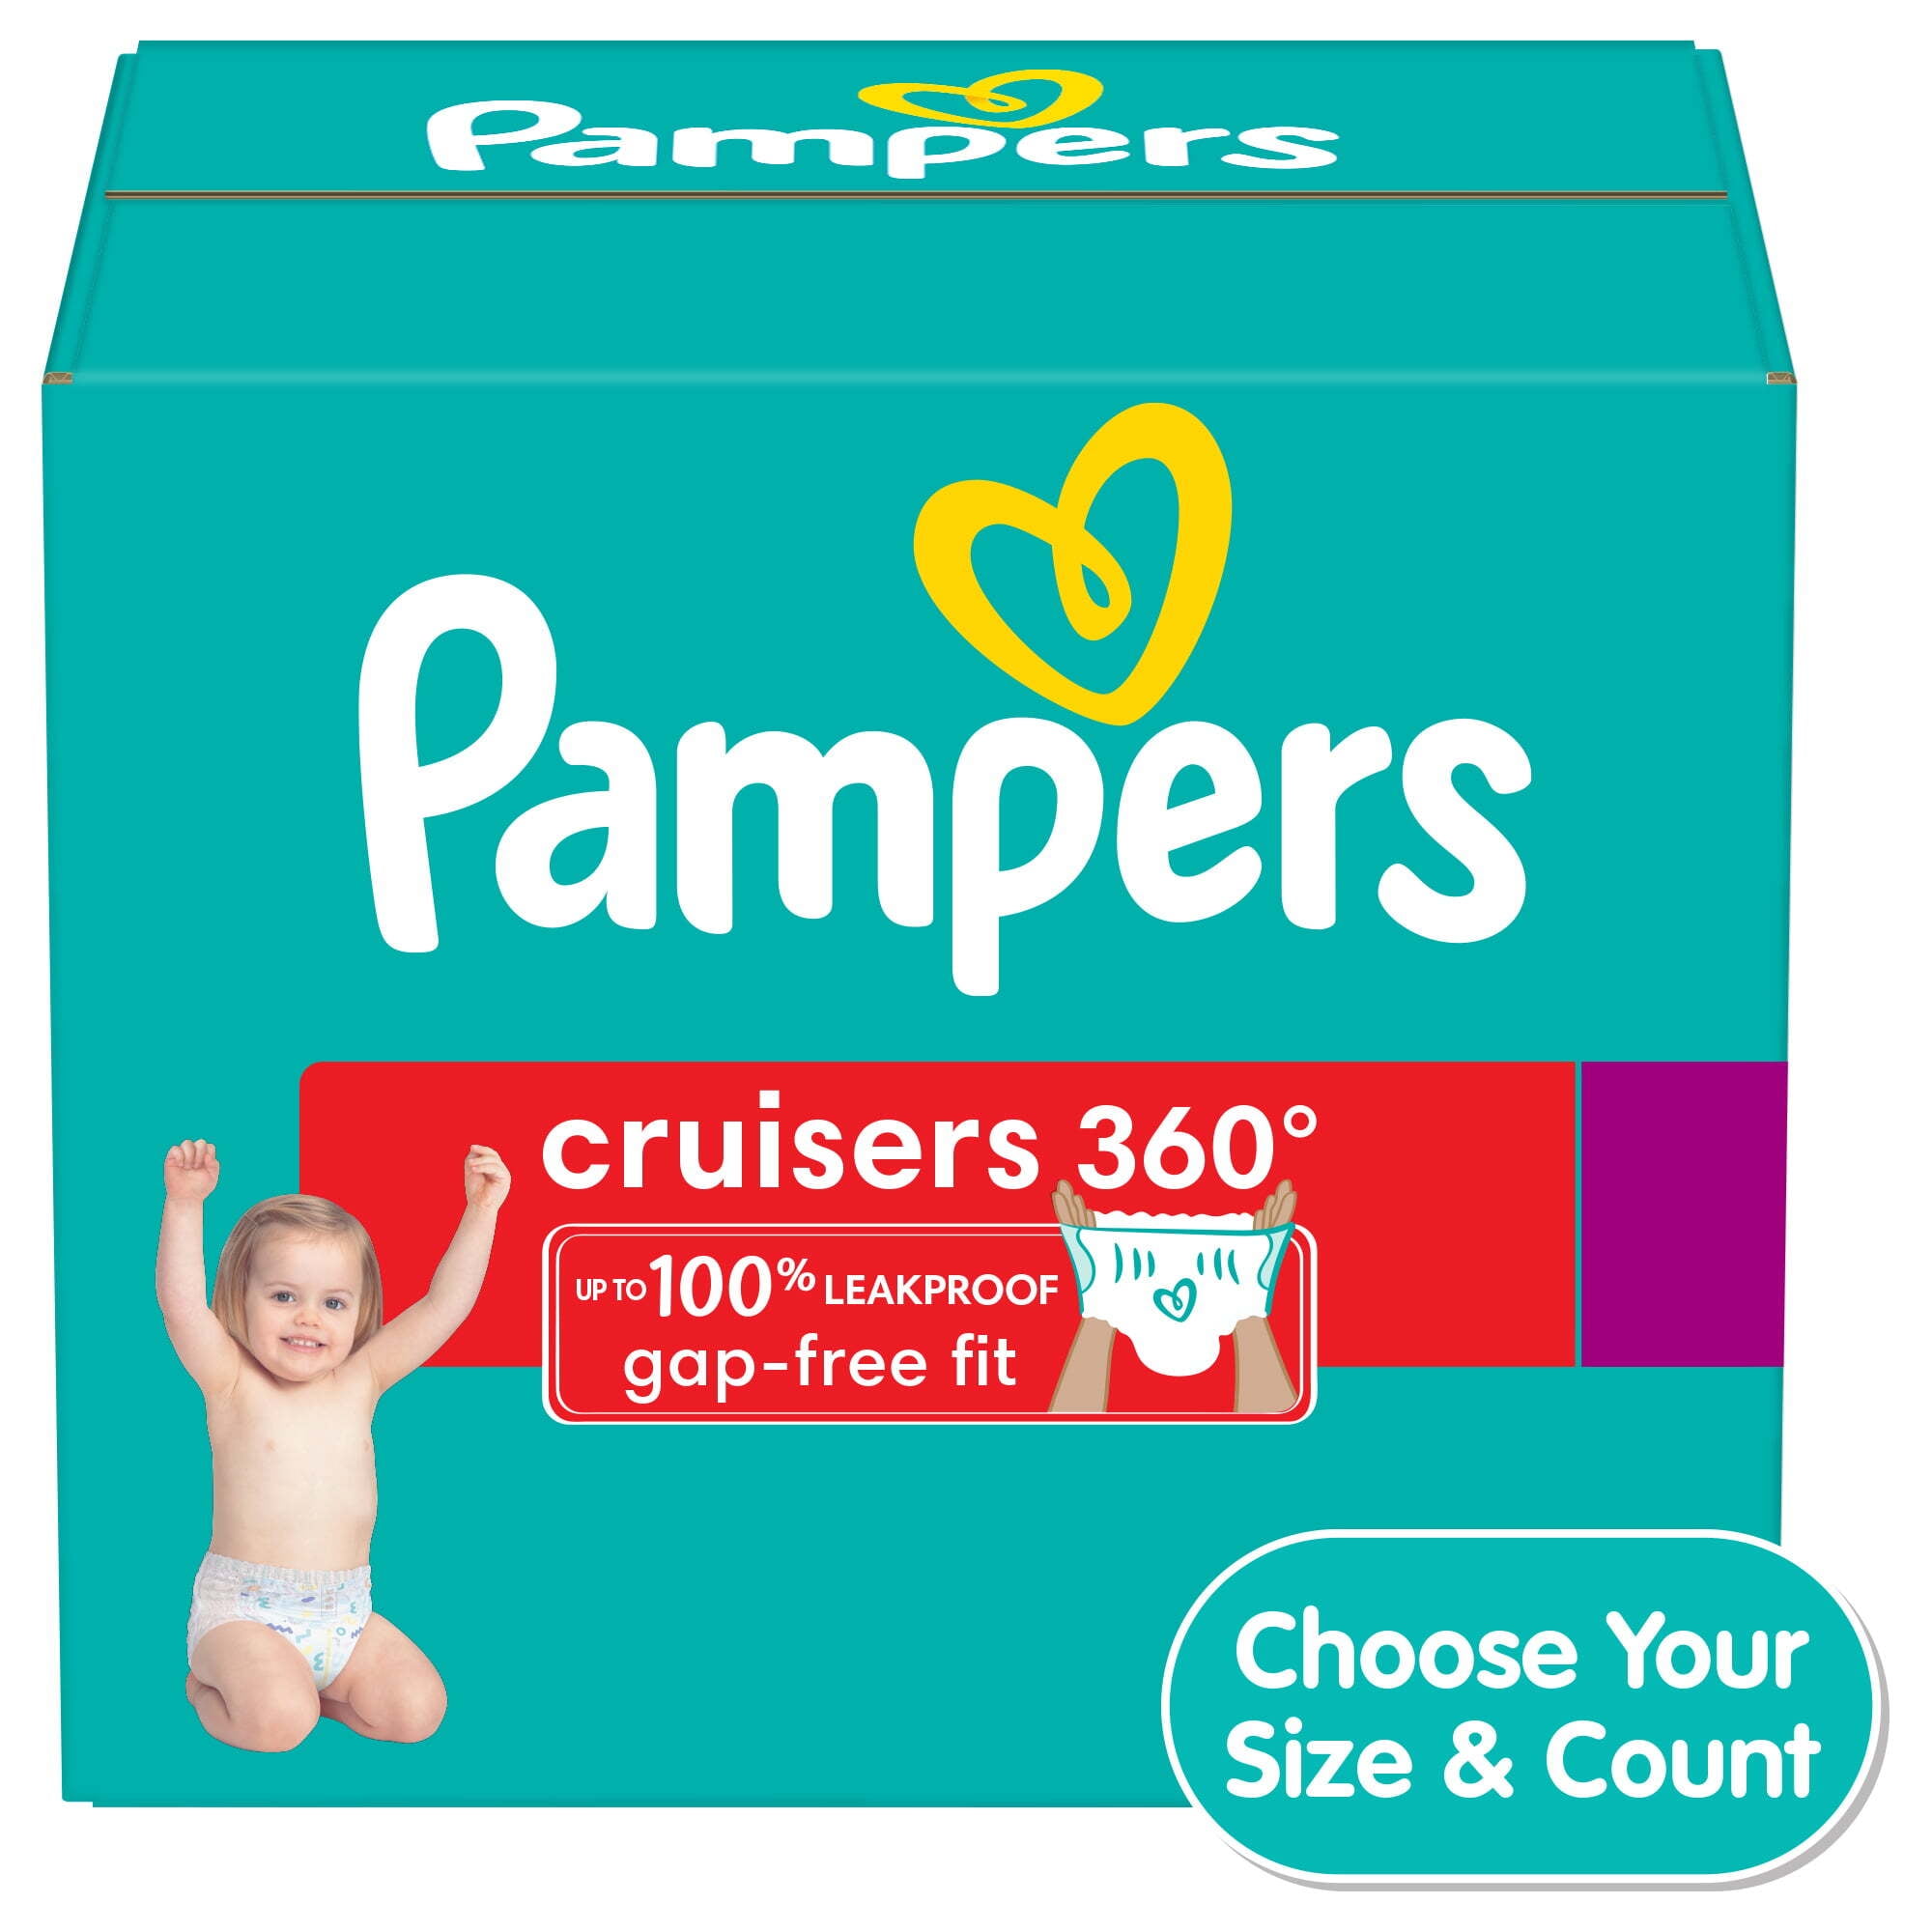 Pampers Cruisers Diapers 360 Size 5, 56 Count (Choose Your Size & Count)